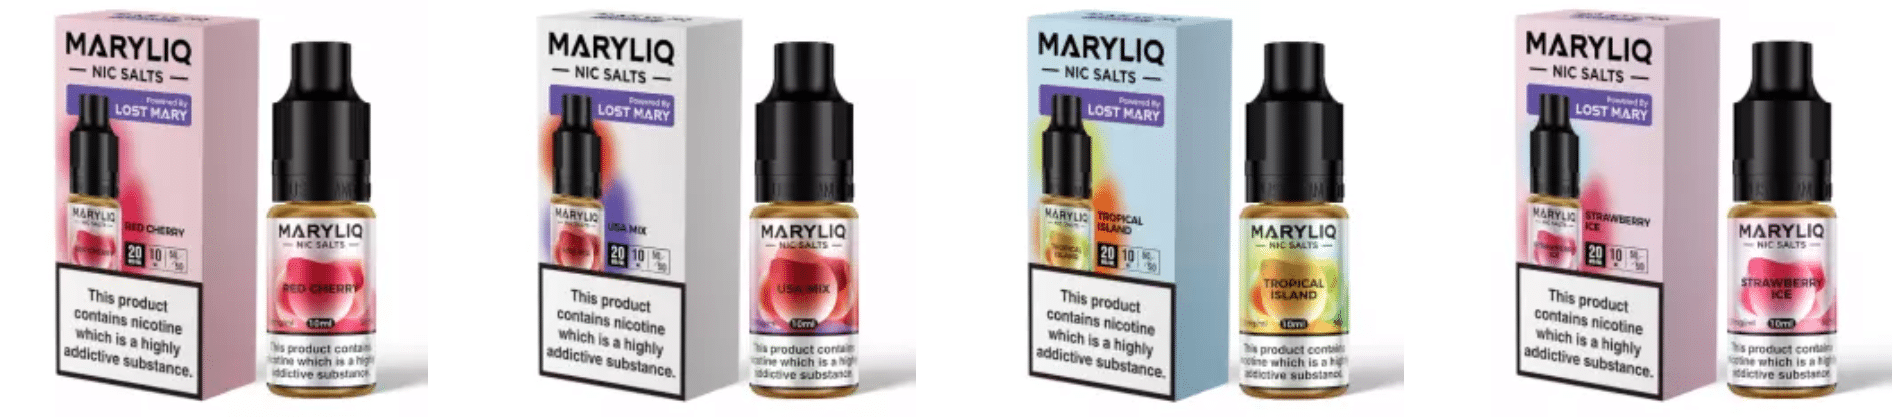 Maryliq Nic Salts By Lost Mary-flavours-diy-eliquids